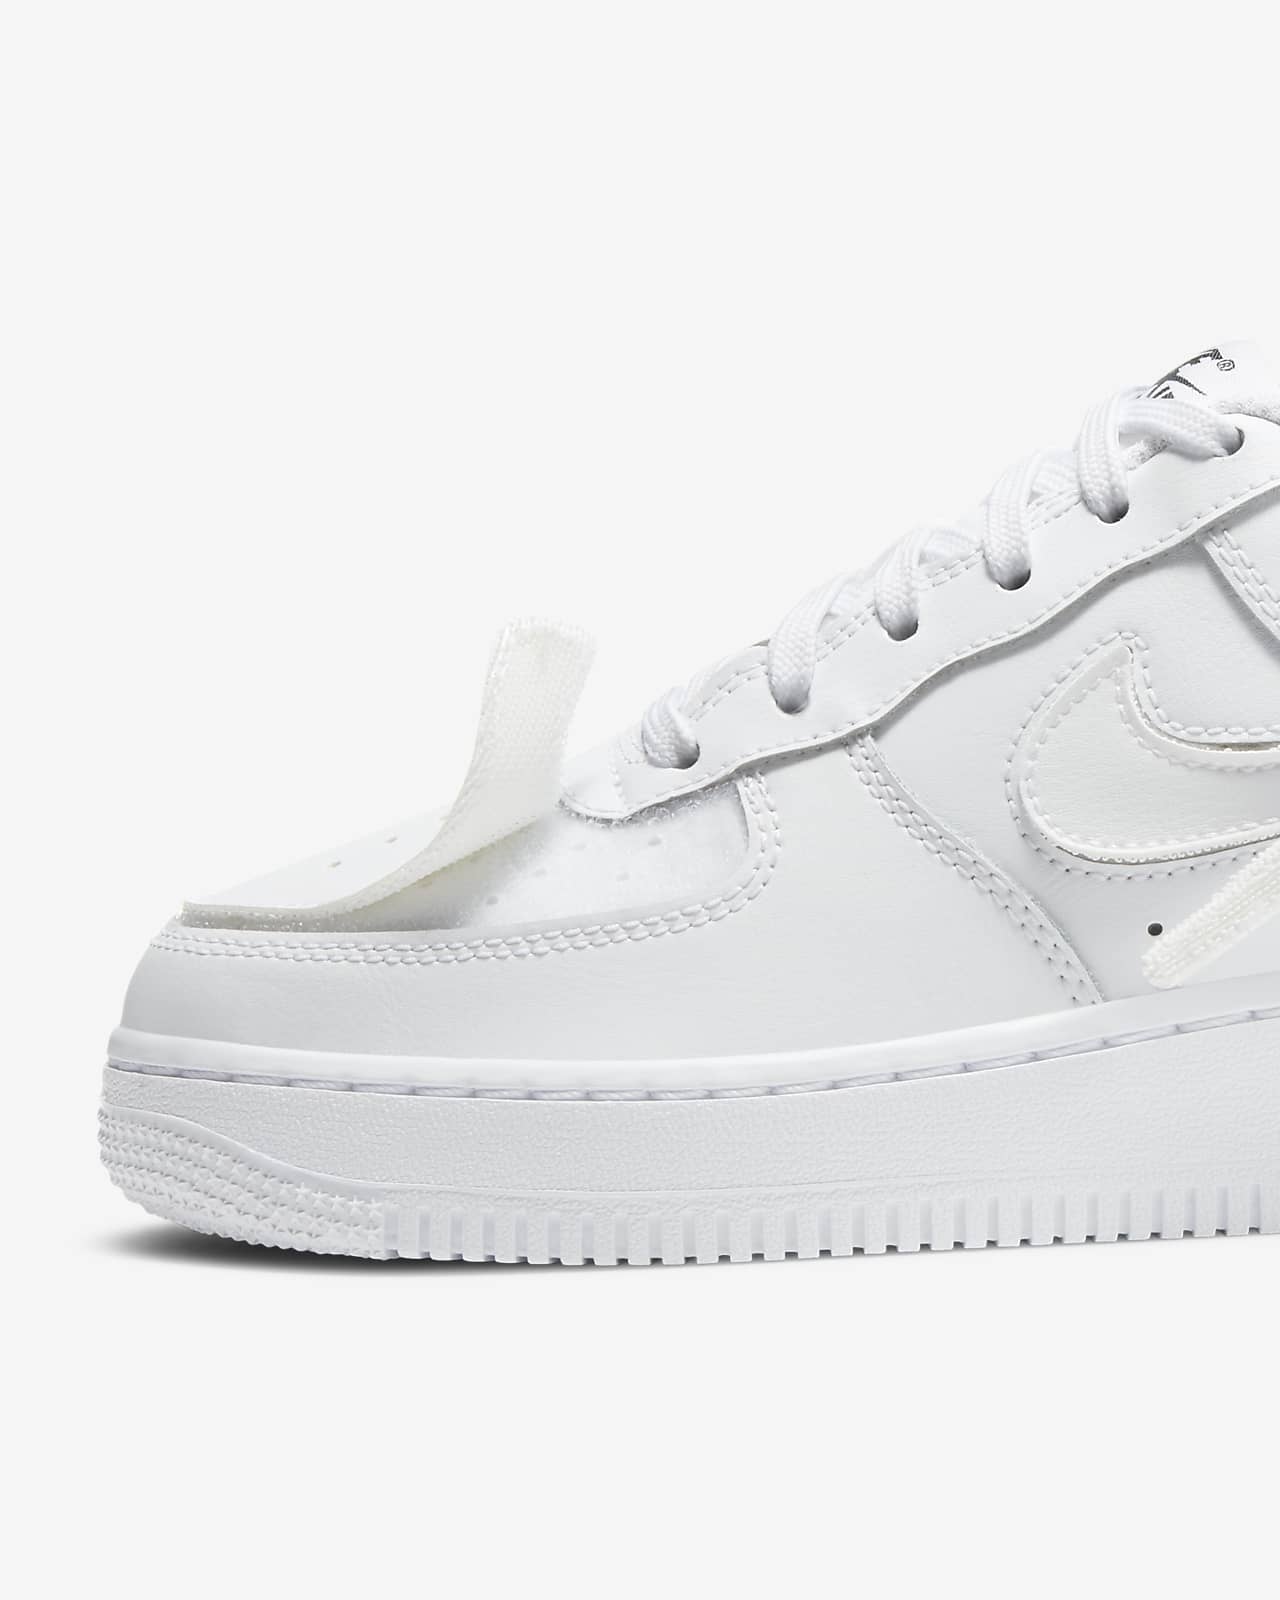 nike air force 1 under 100